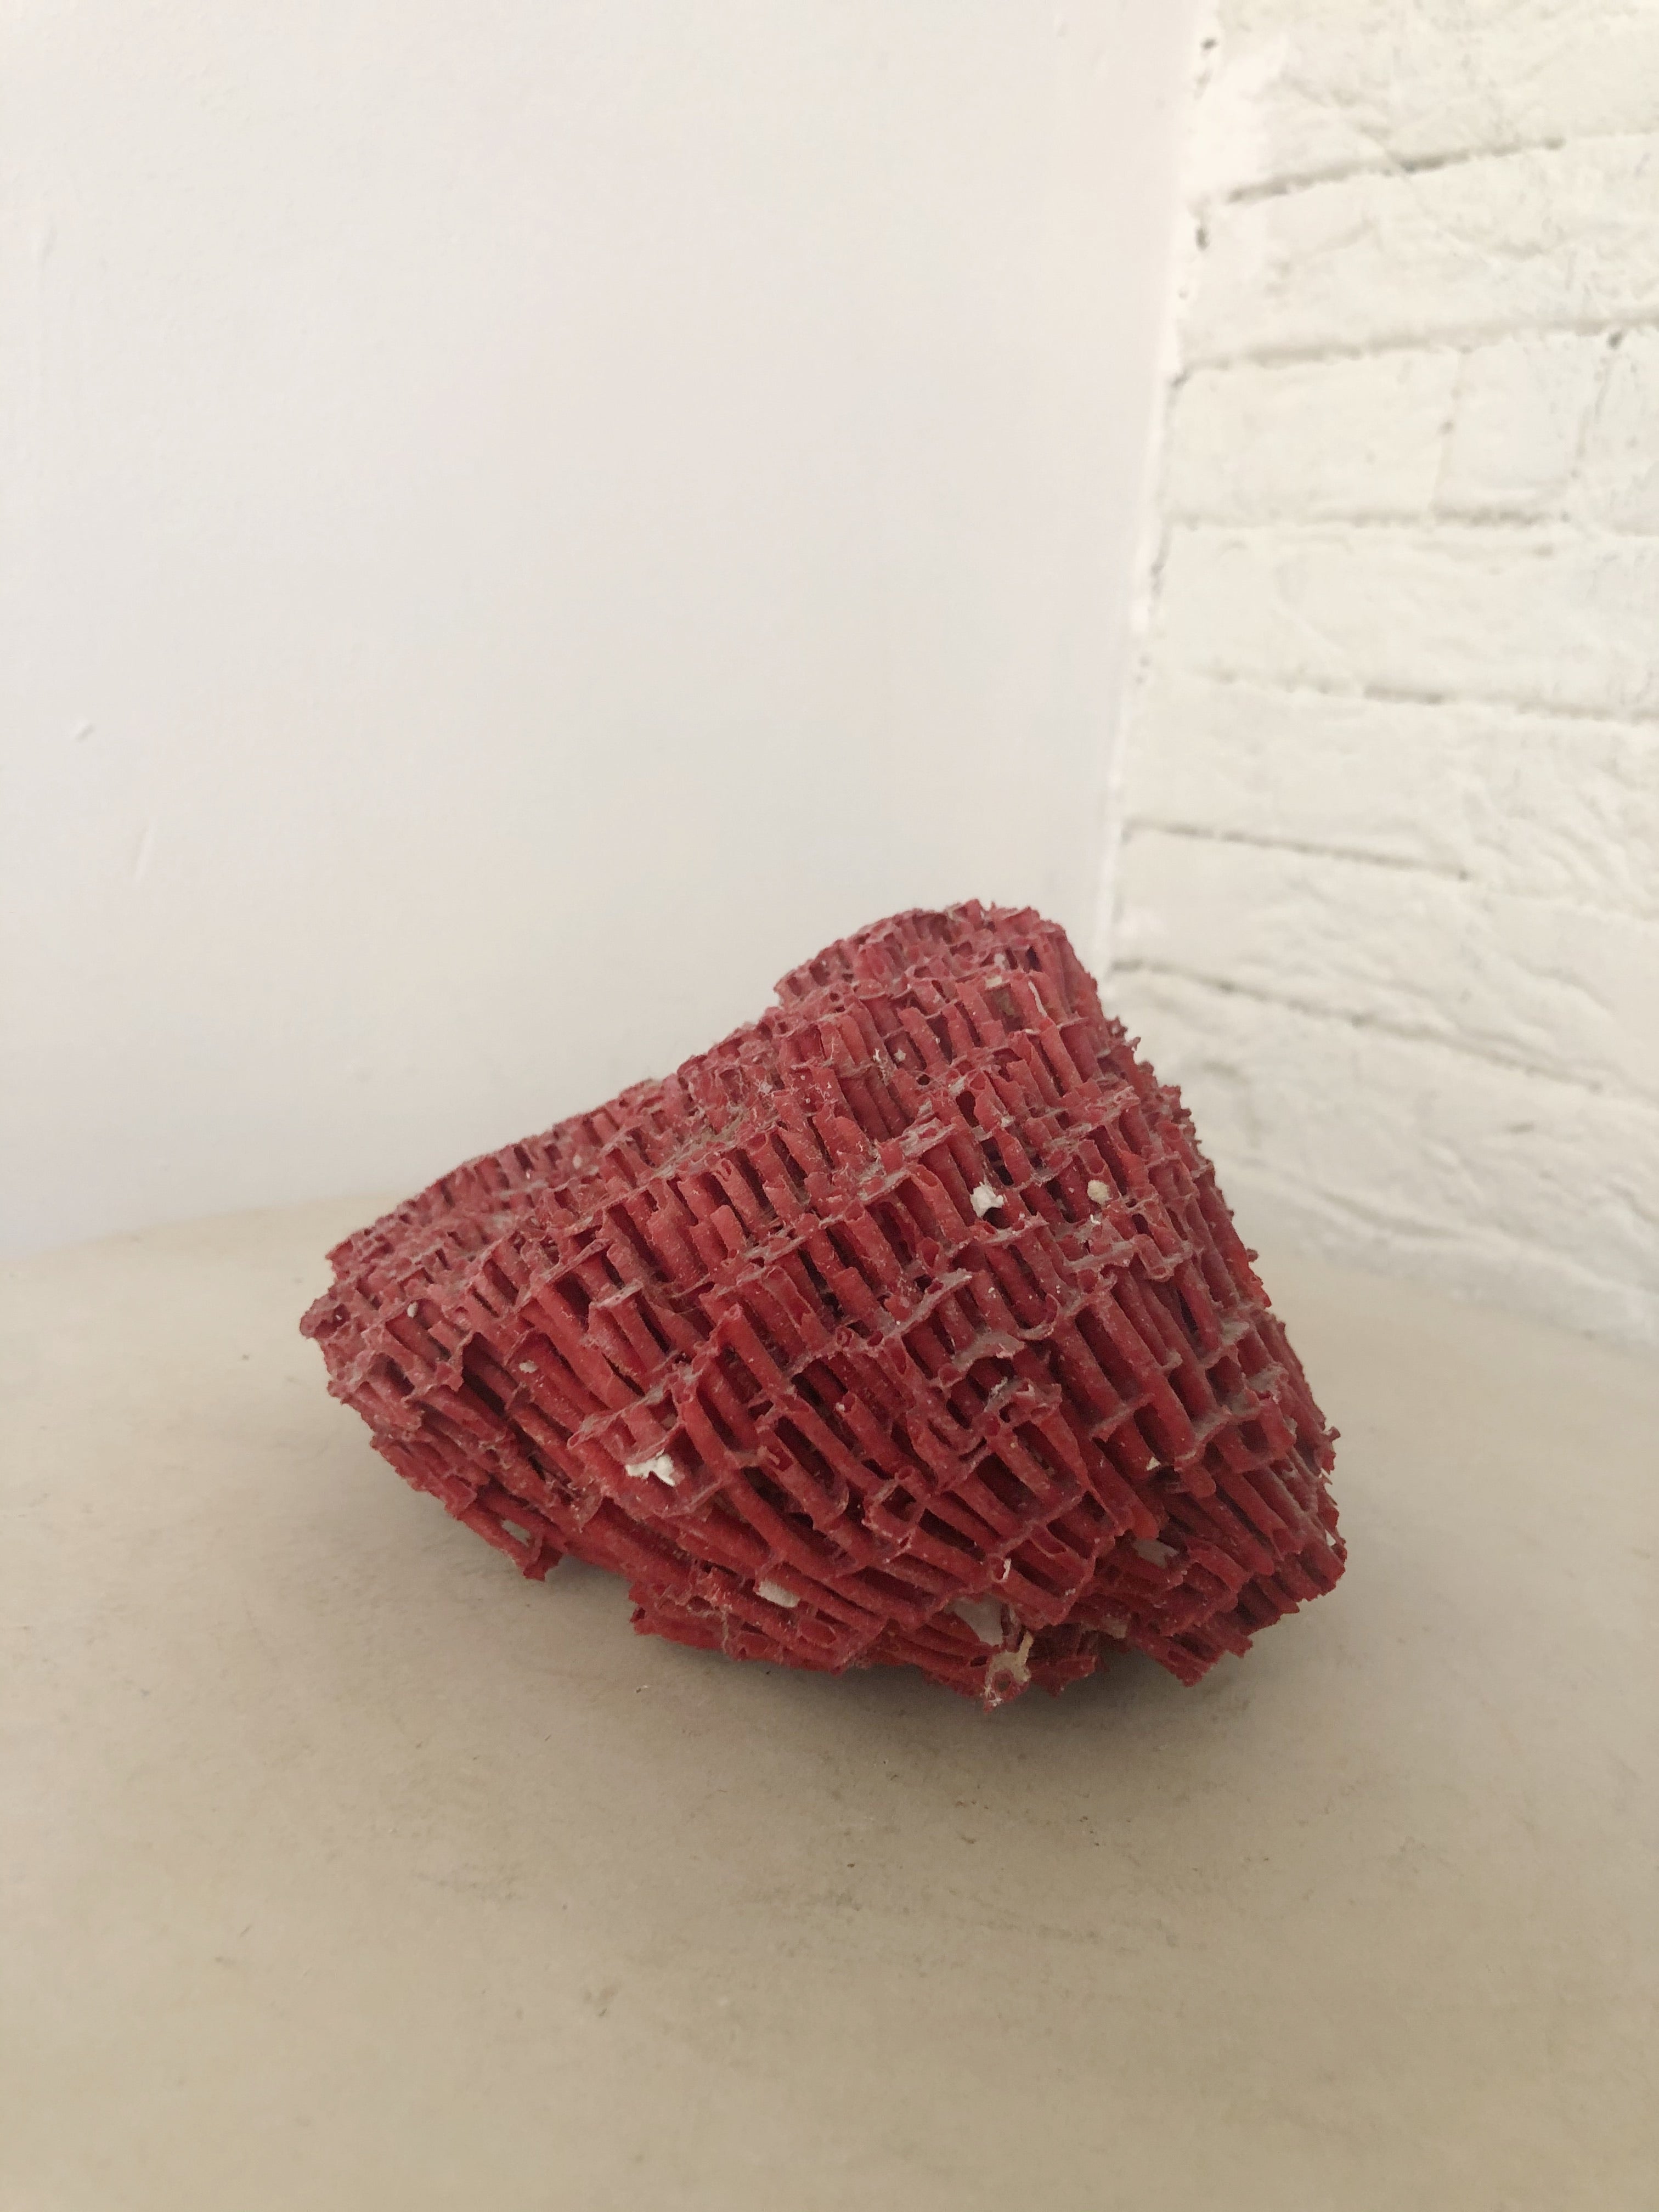 PIECE OF RED CORAL